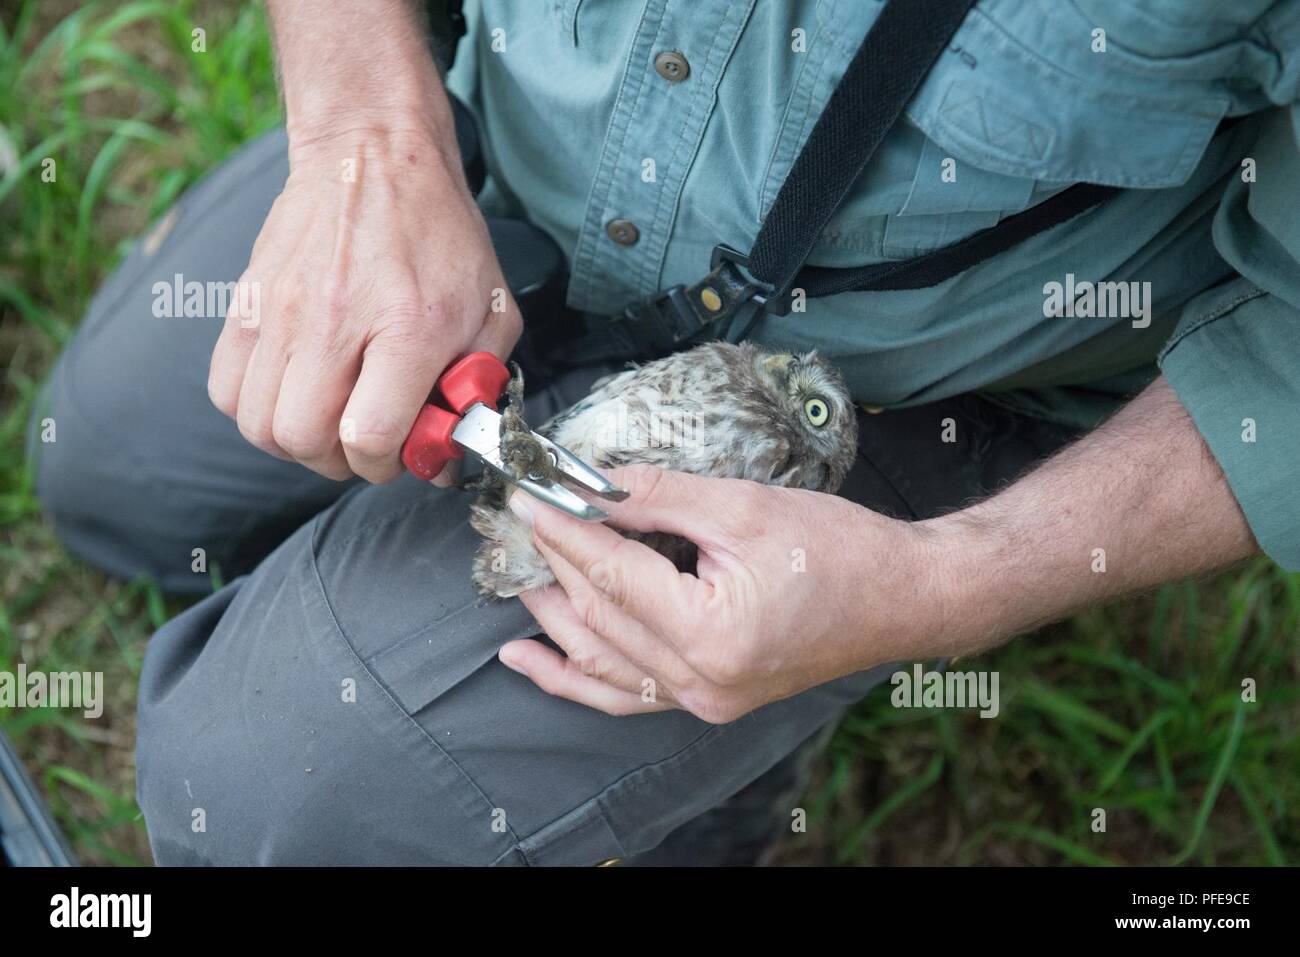 A volunteer for the Belgian non-profit Noctua.org secures the band on a little owl (Athene noctua), one of the protected species of birds nesting on Chièvres Air Base, Belgium, June 8, 2018. Banding is a universal and indispensable technique for studying the movement, survival and behavior of birds. Stock Photo